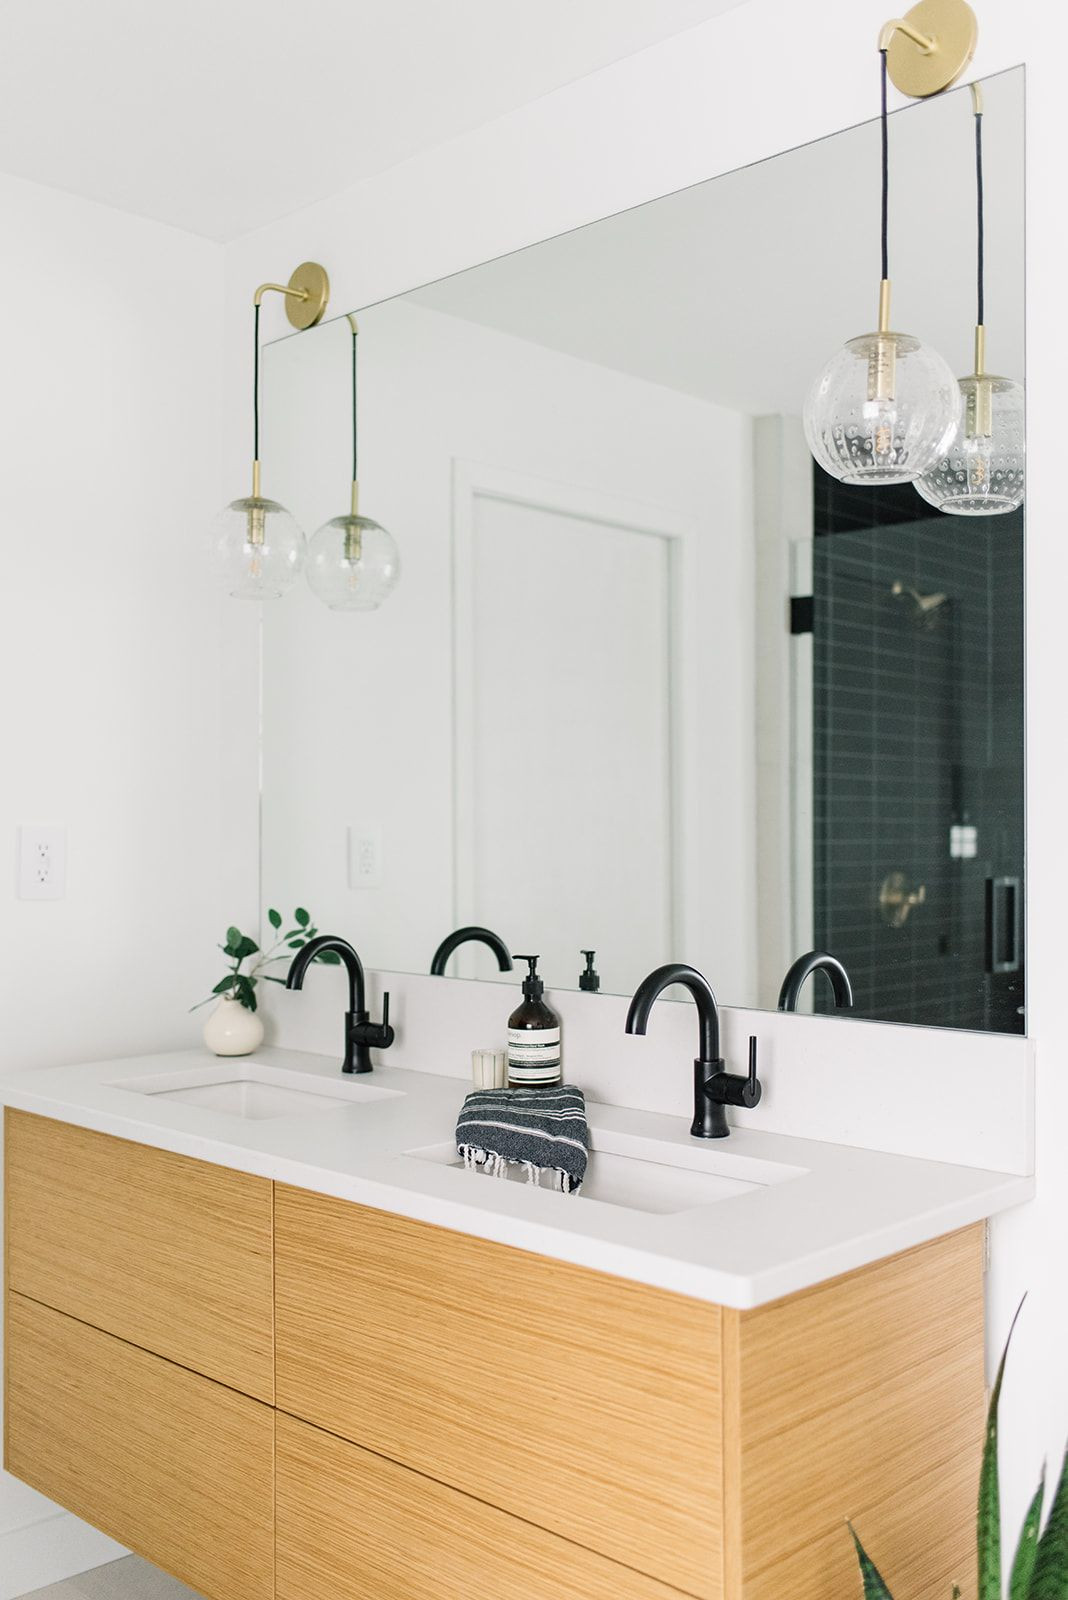 Bathroom Pendant Lights Over Vanity
 Client Reveal TheDuchess TheDrive